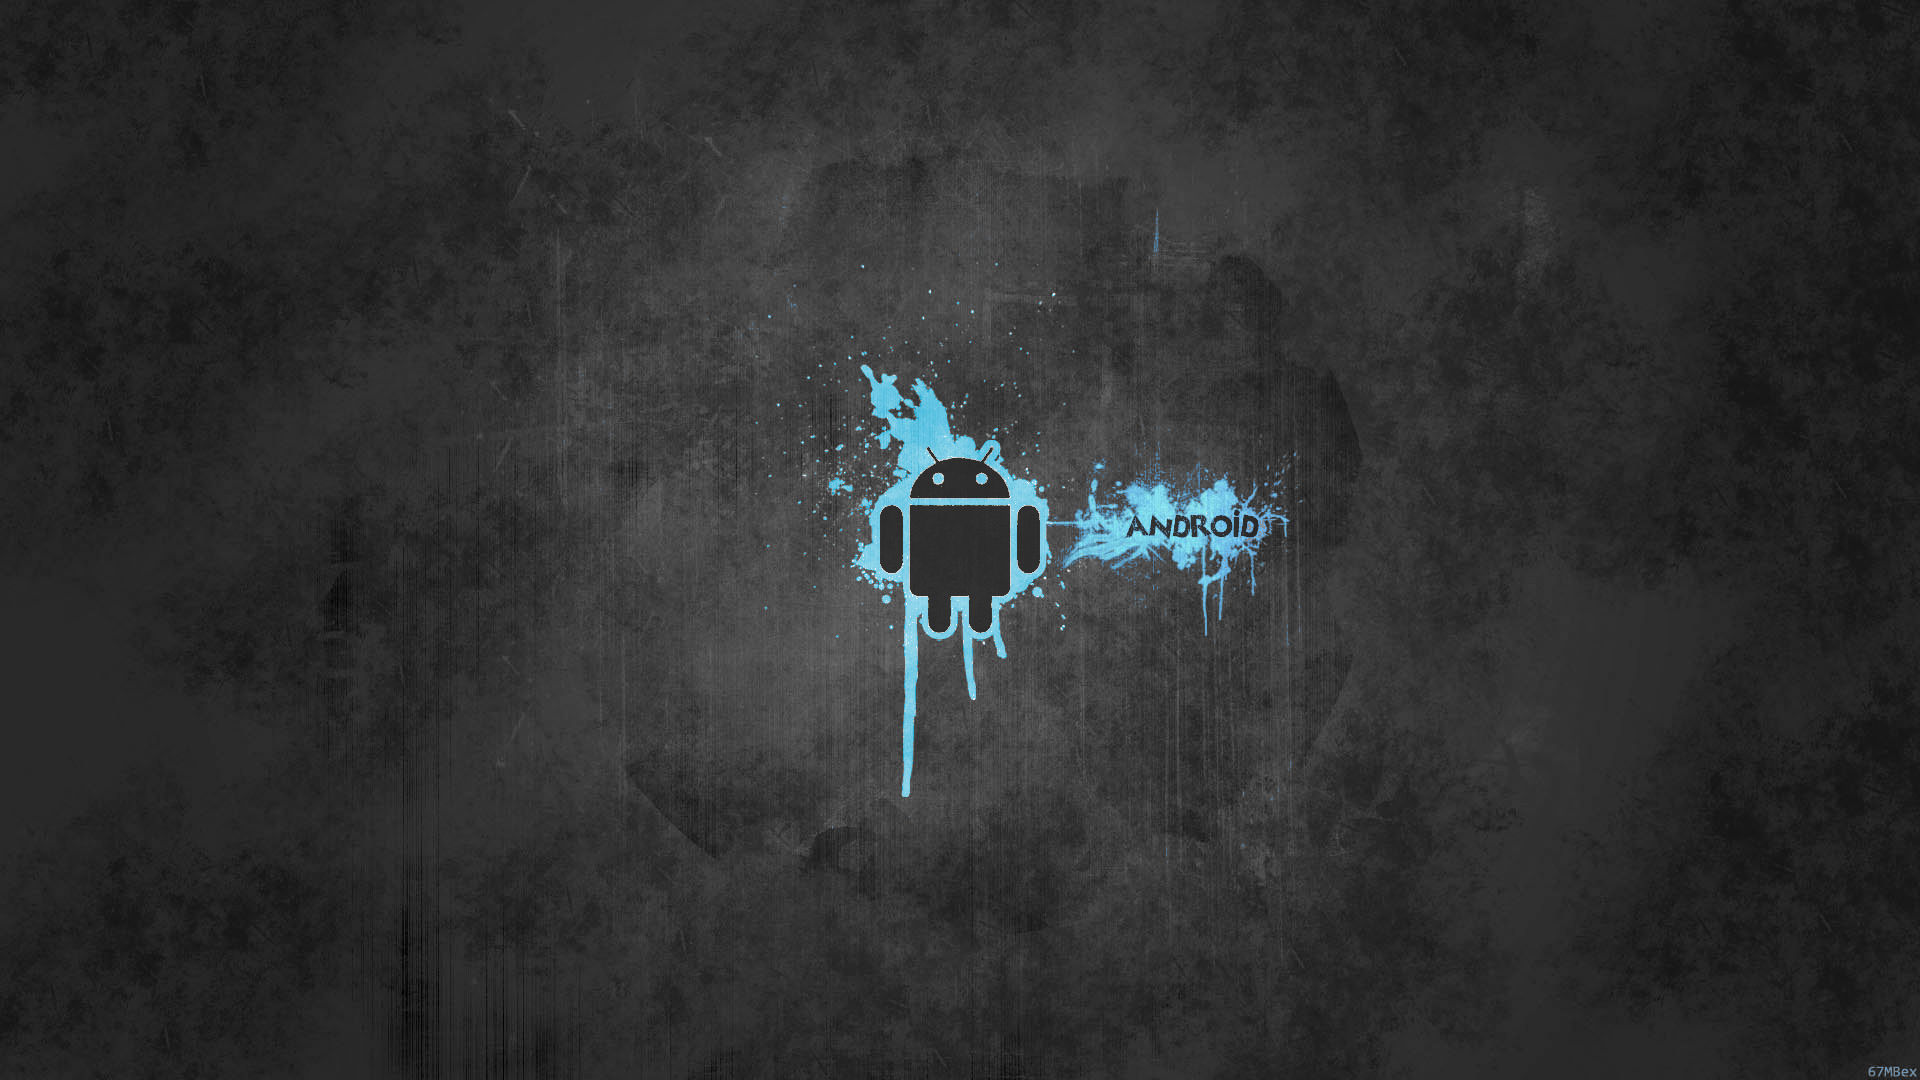 Android hd wallpaper